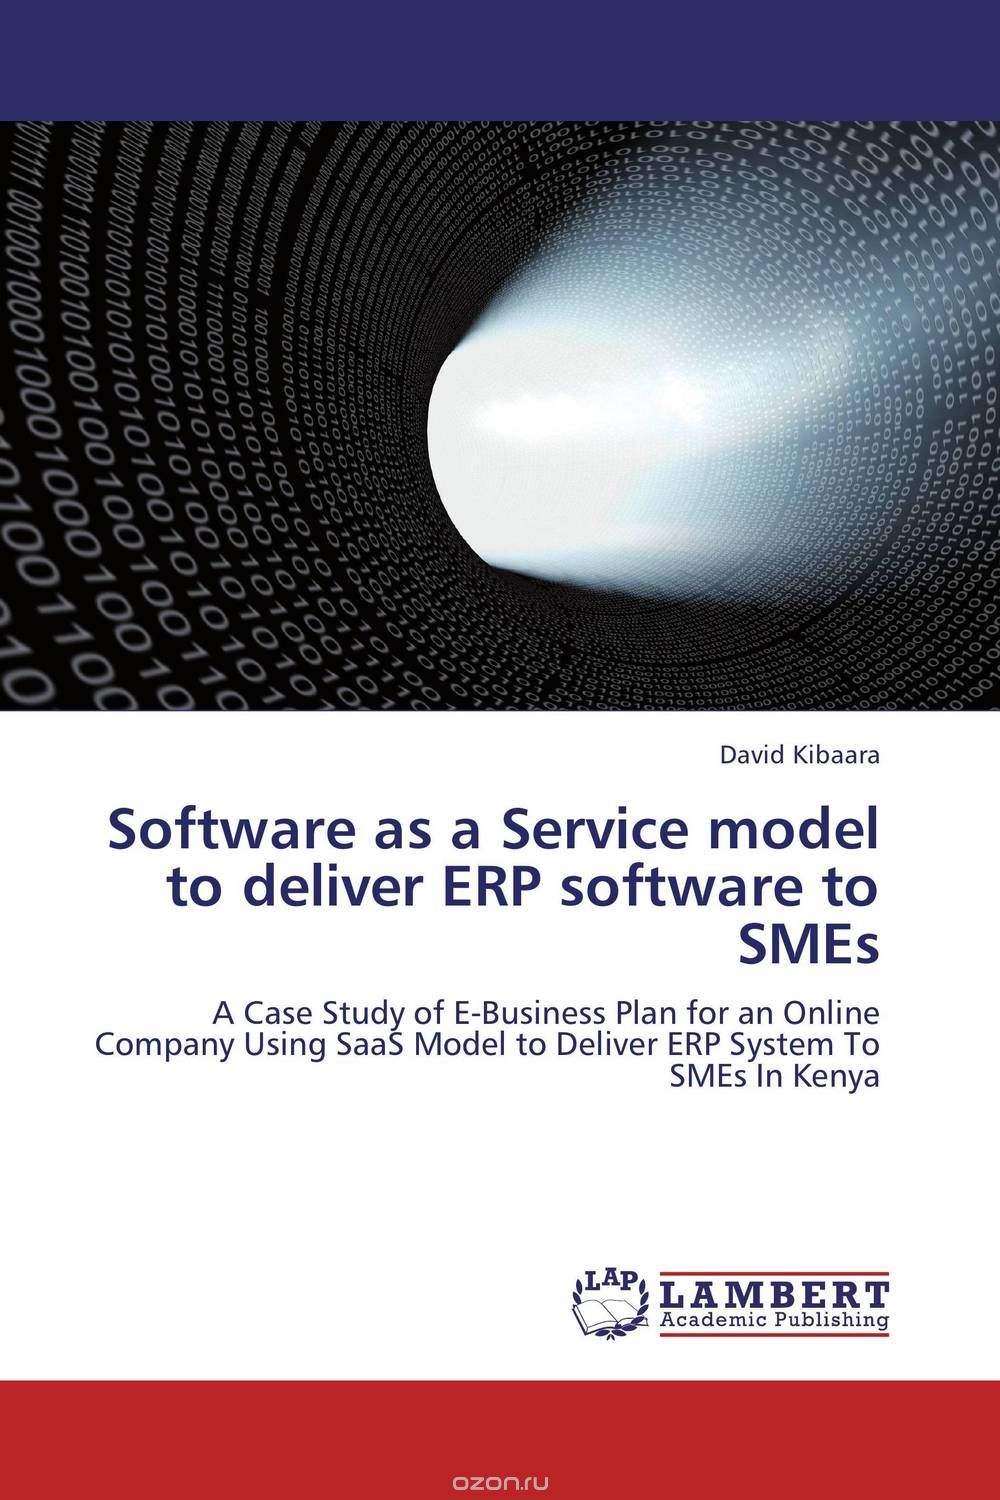 Скачать книгу "Software as a Service model to deliver ERP software to SMEs"